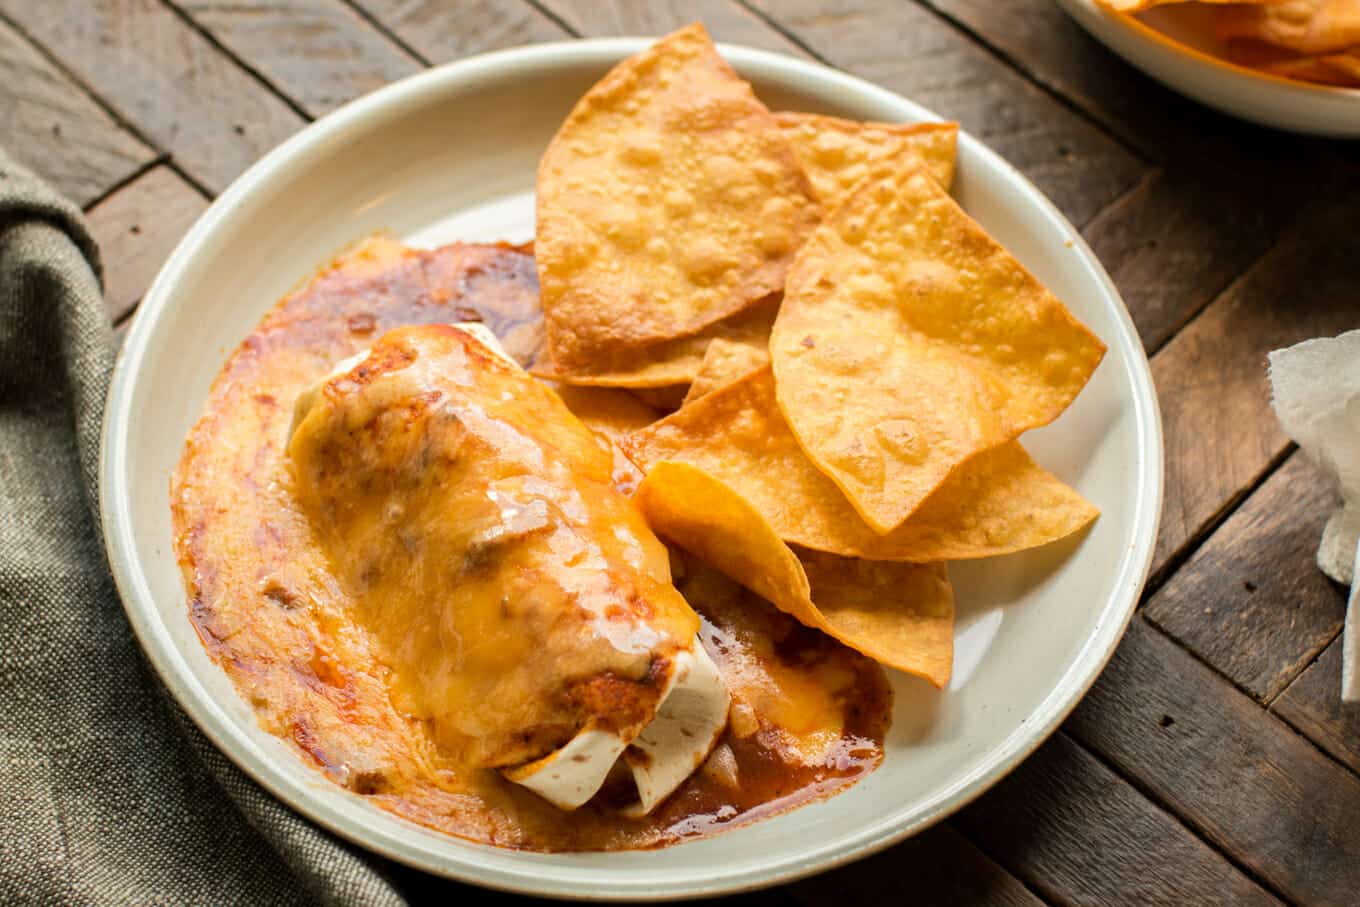 beef burrito with red enchilada sauce on top on plate with chips on the side.